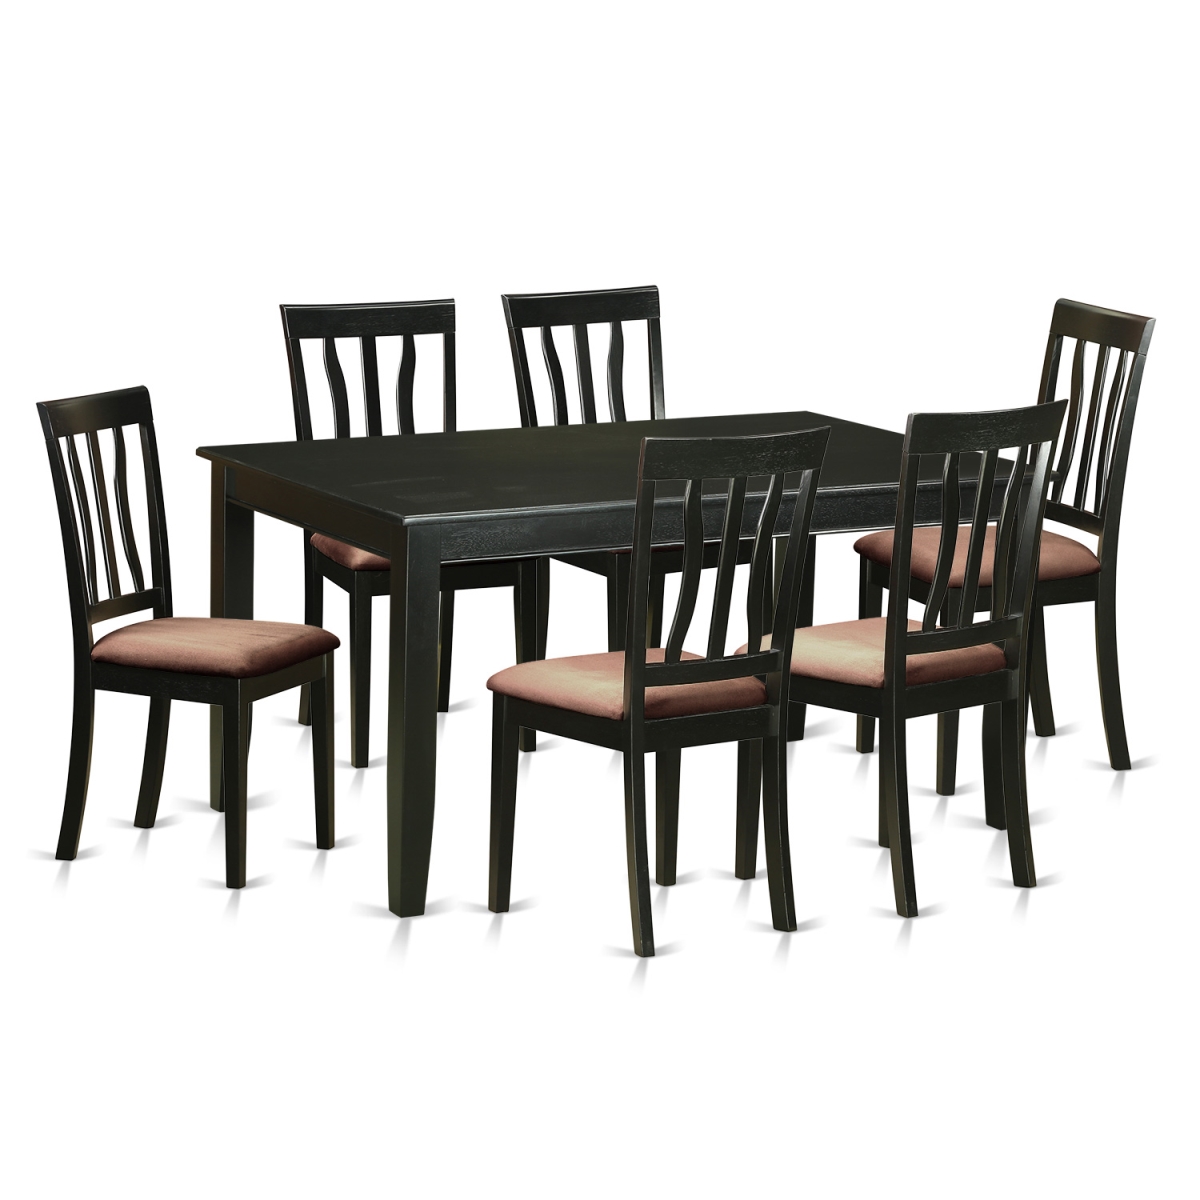 Dinette Set With 6 Table & 6 Chairs, Black - 7 Piece